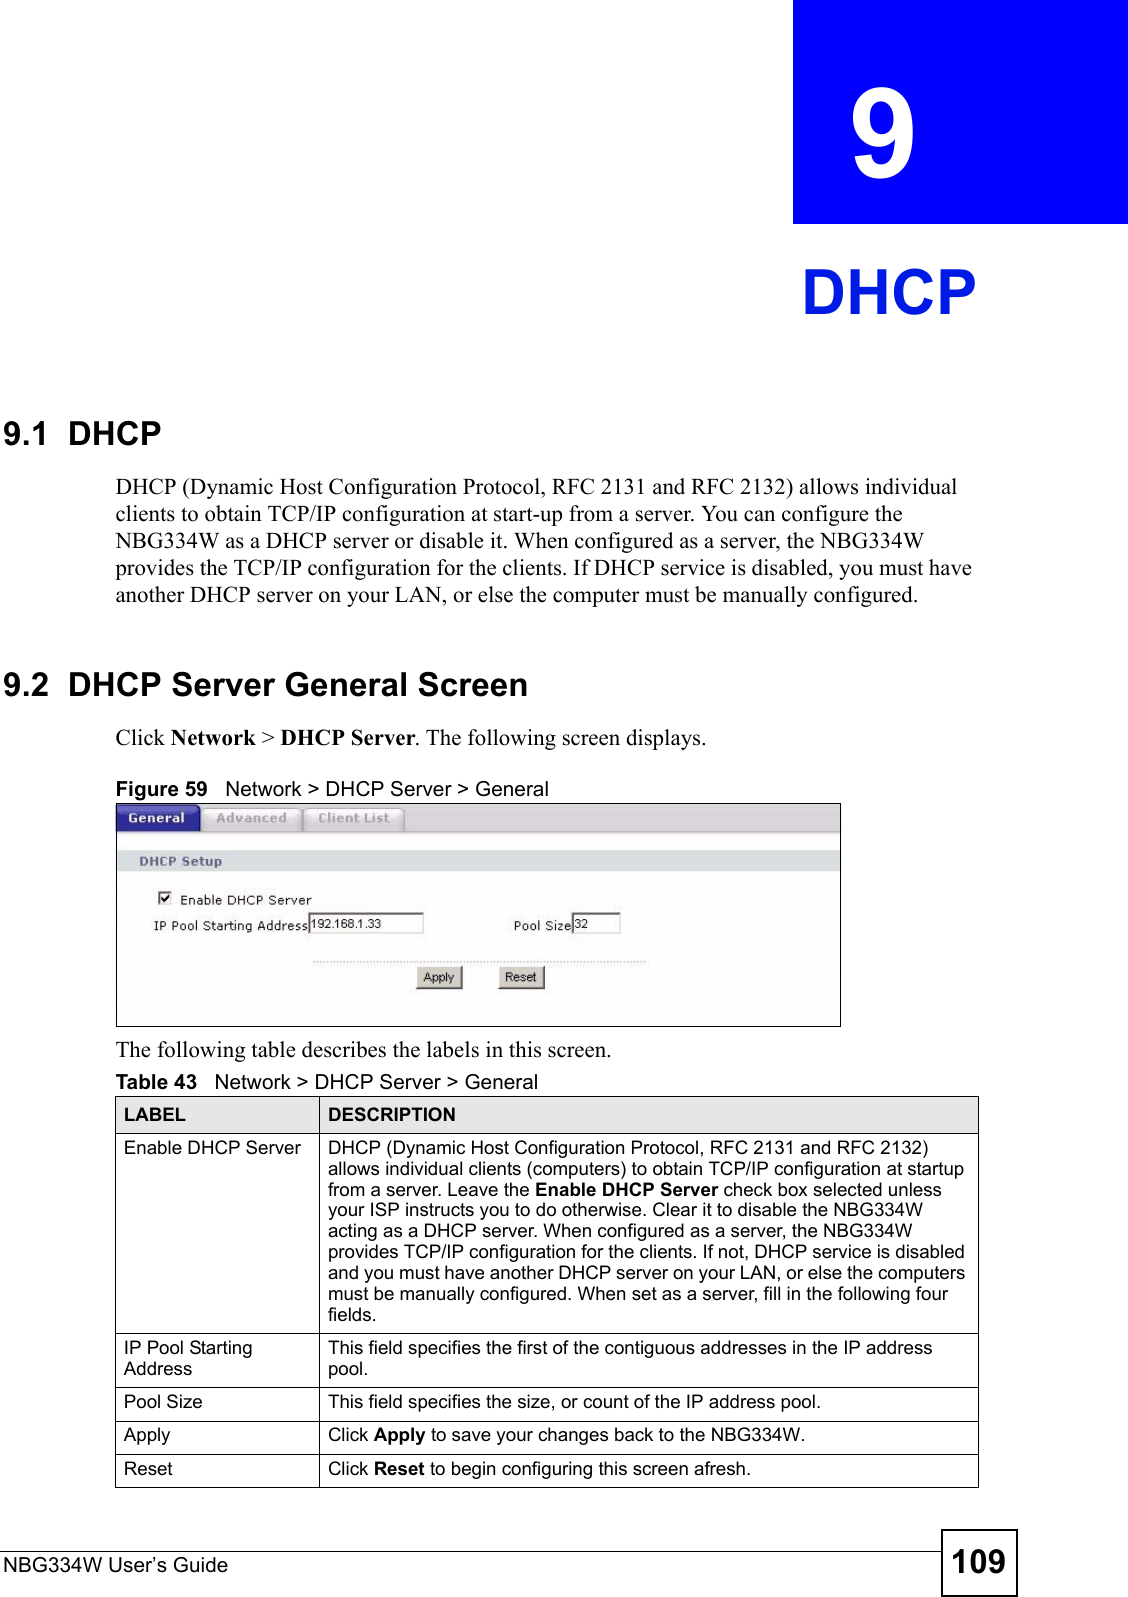 NBG334W User’s Guide 109CHAPTER  9 DHCP9.1  DHCPDHCP (Dynamic Host Configuration Protocol, RFC 2131 and RFC 2132) allows individual clients to obtain TCP/IP configuration at start-up from a server. You can configure the NBG334W as a DHCP server or disable it. When configured as a server, the NBG334W provides the TCP/IP configuration for the clients. If DHCP service is disabled, you must have another DHCP server on your LAN, or else the computer must be manually configured.9.2  DHCP Server General ScreenClick Network &gt; DHCP Server. The following screen displays.Figure 59   Network &gt; DHCP Server &gt; General   The following table describes the labels in this screen.Table 43   Network &gt; DHCP Server &gt; General LABEL DESCRIPTIONEnable DHCP Server DHCP (Dynamic Host Configuration Protocol, RFC 2131 and RFC 2132) allows individual clients (computers) to obtain TCP/IP configuration at startup from a server. Leave the Enable DHCP Server check box selected unless your ISP instructs you to do otherwise. Clear it to disable the NBG334W acting as a DHCP server. When configured as a server, the NBG334W provides TCP/IP configuration for the clients. If not, DHCP service is disabled and you must have another DHCP server on your LAN, or else the computers must be manually configured. When set as a server, fill in the following four fields.IP Pool Starting AddressThis field specifies the first of the contiguous addresses in the IP address pool.Pool Size This field specifies the size, or count of the IP address pool.Apply Click Apply to save your changes back to the NBG334W.Reset Click Reset to begin configuring this screen afresh.